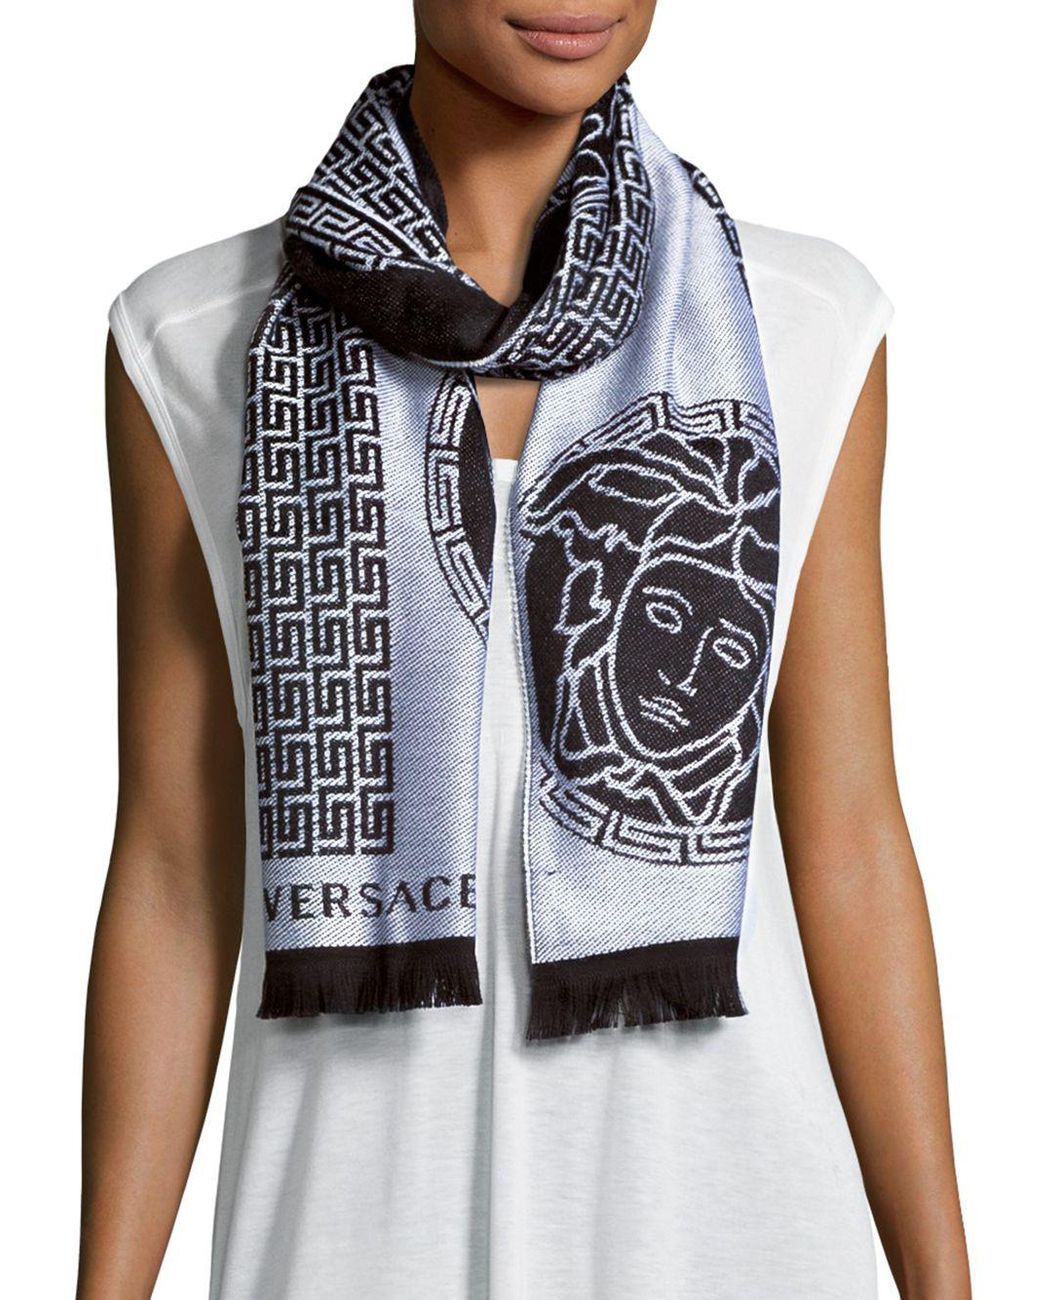 VERSACE Large/Long Medusa Wool Scarf New MADE IN ITAL 